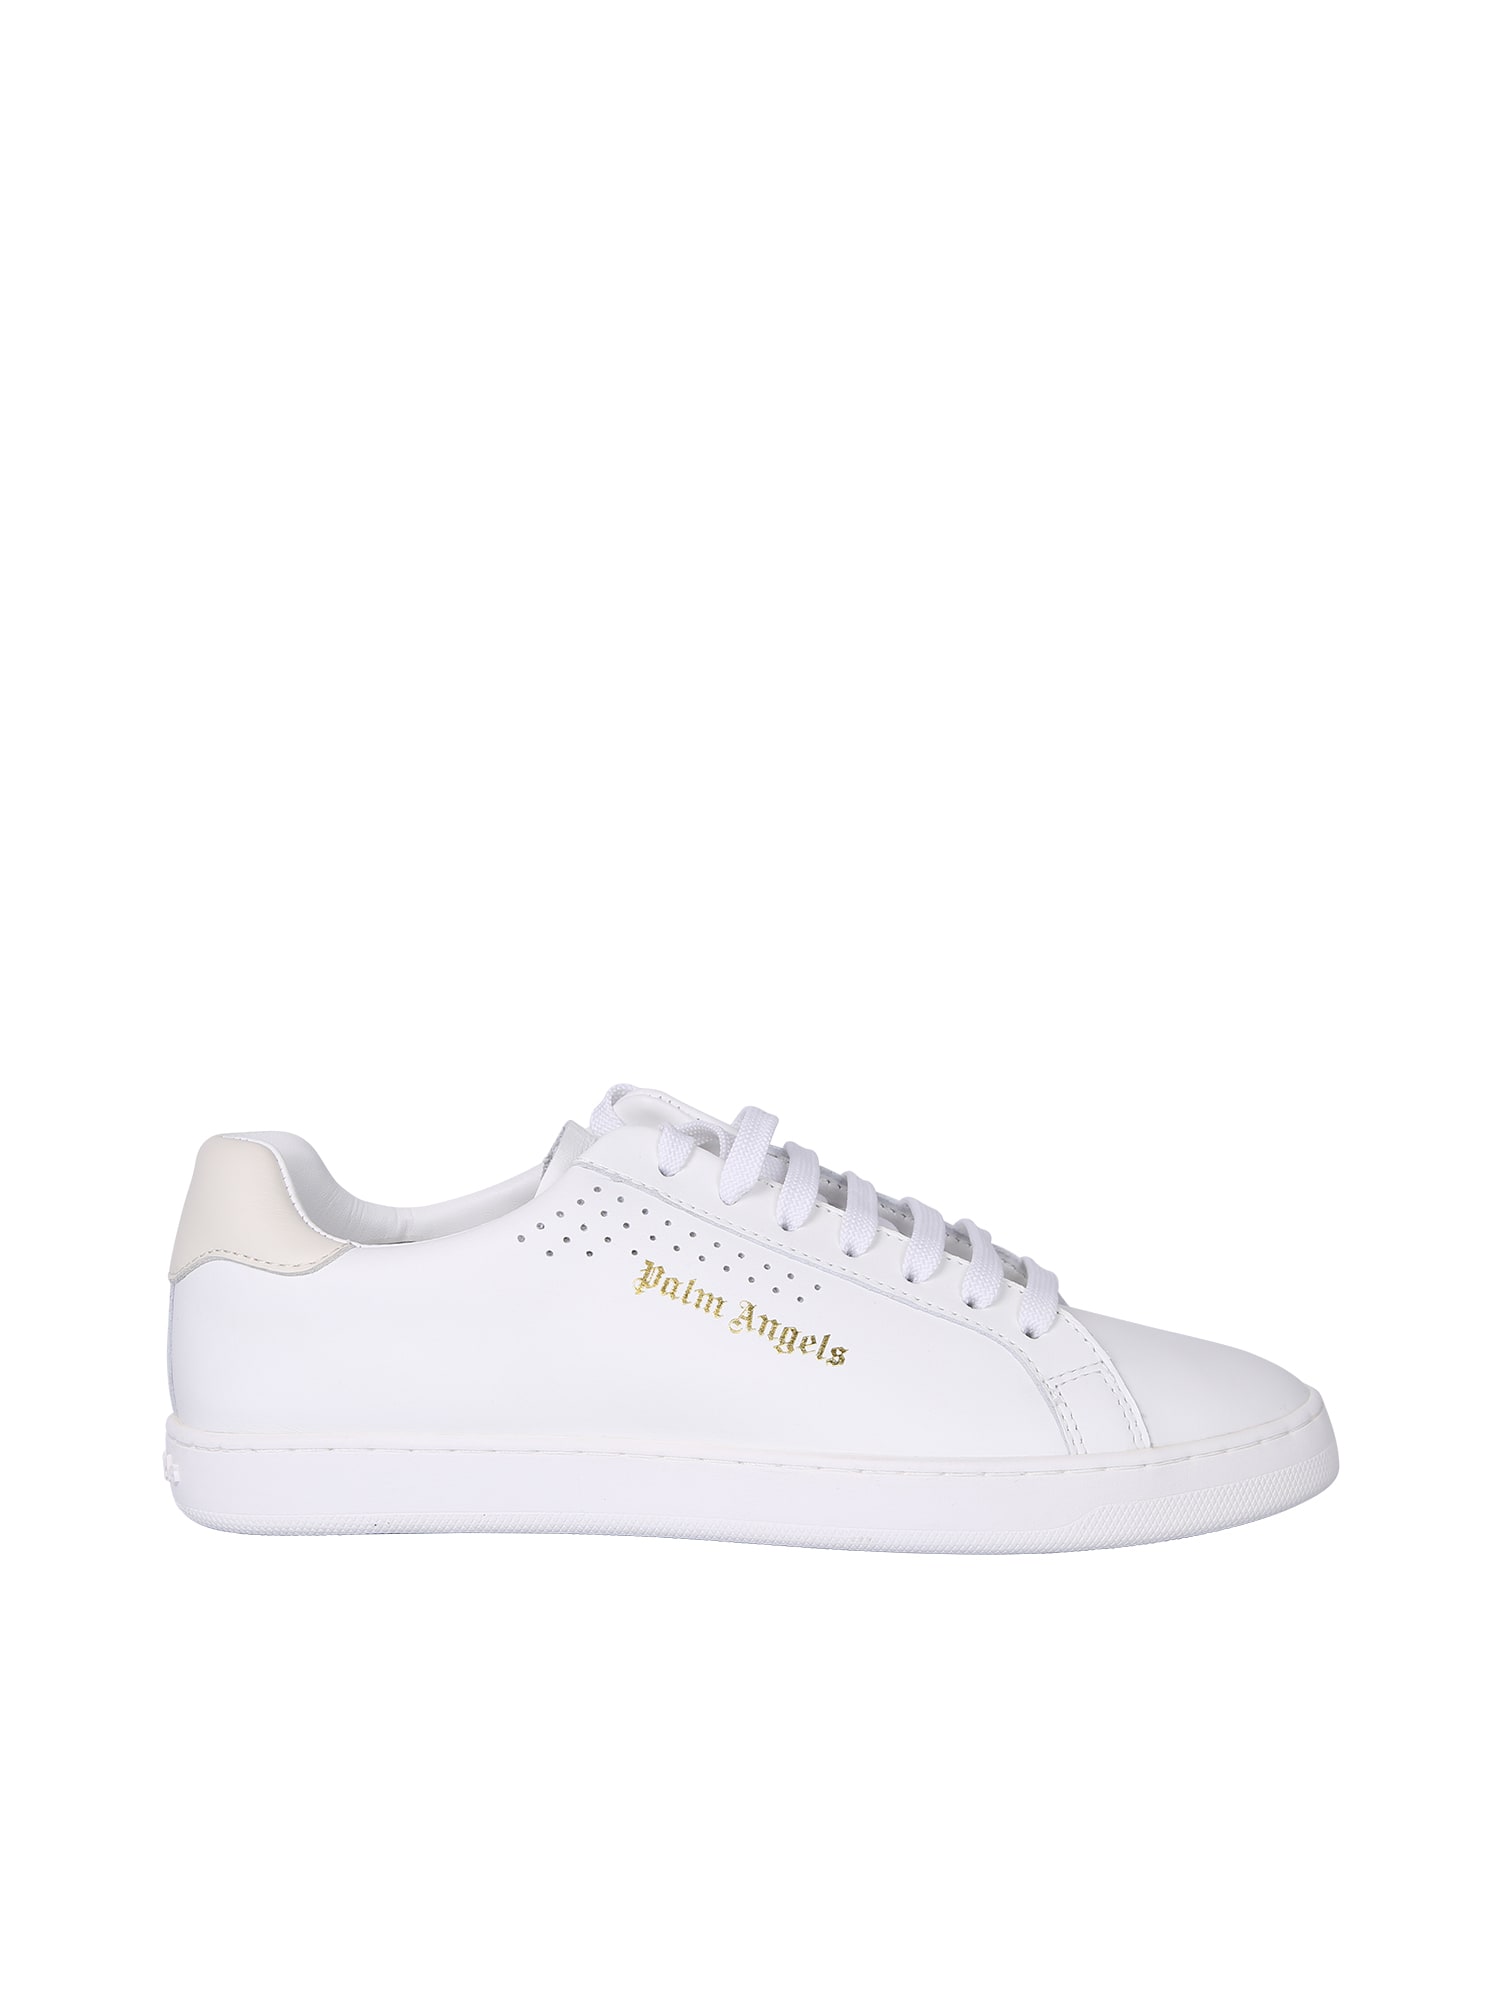 Palm Angels Leather Sneakers